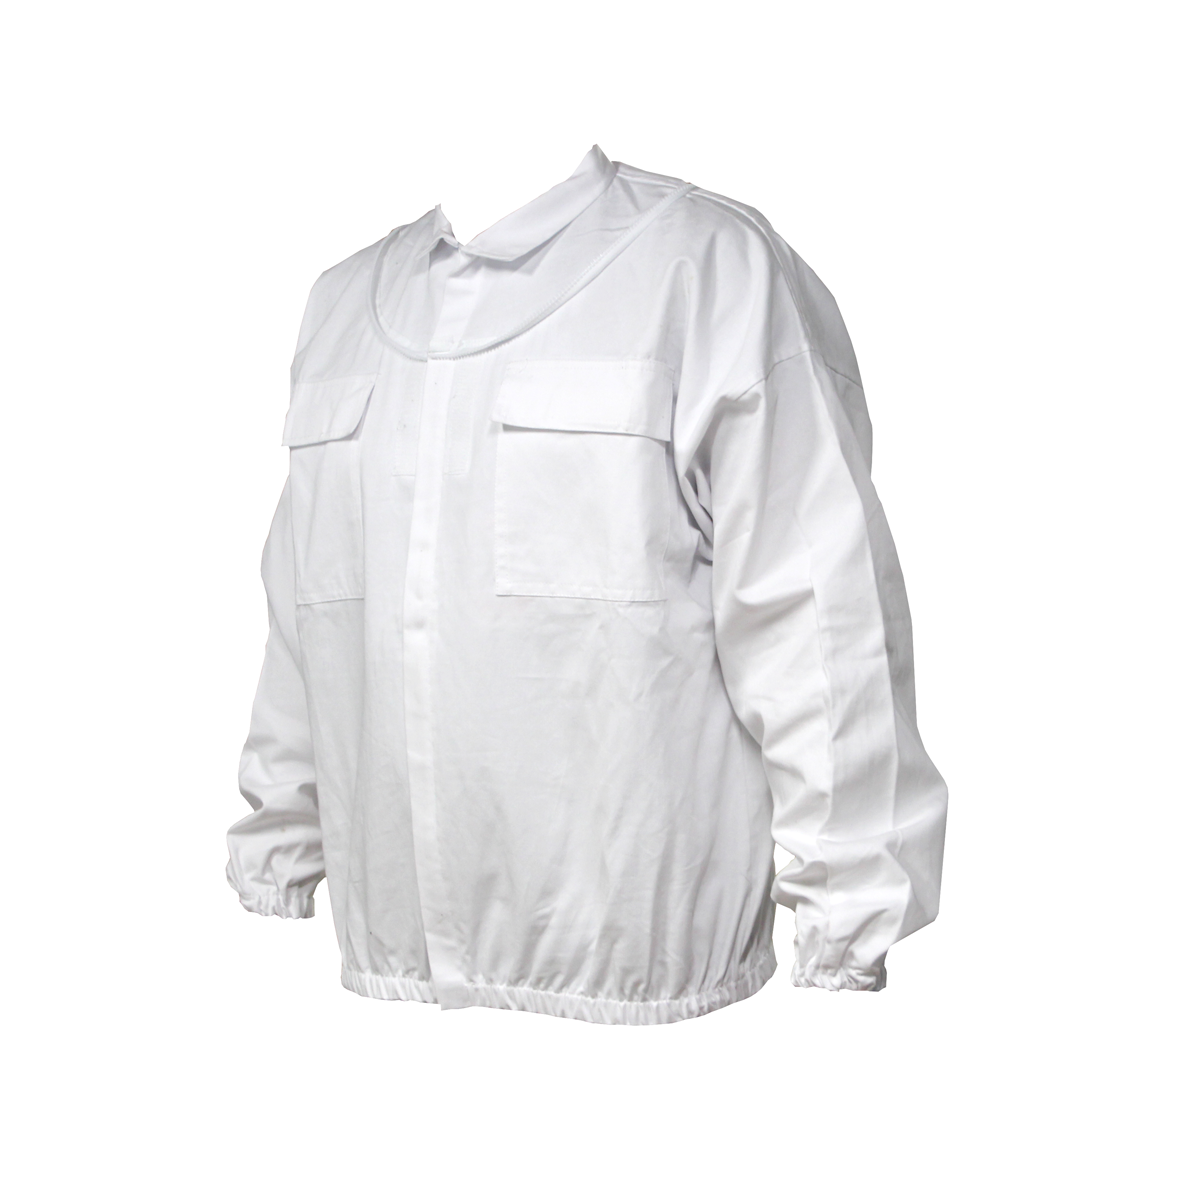 Breathable Protective Beekeeper's Jacket That Cinches Around The Waist And The Arms. Has 2 Pockets